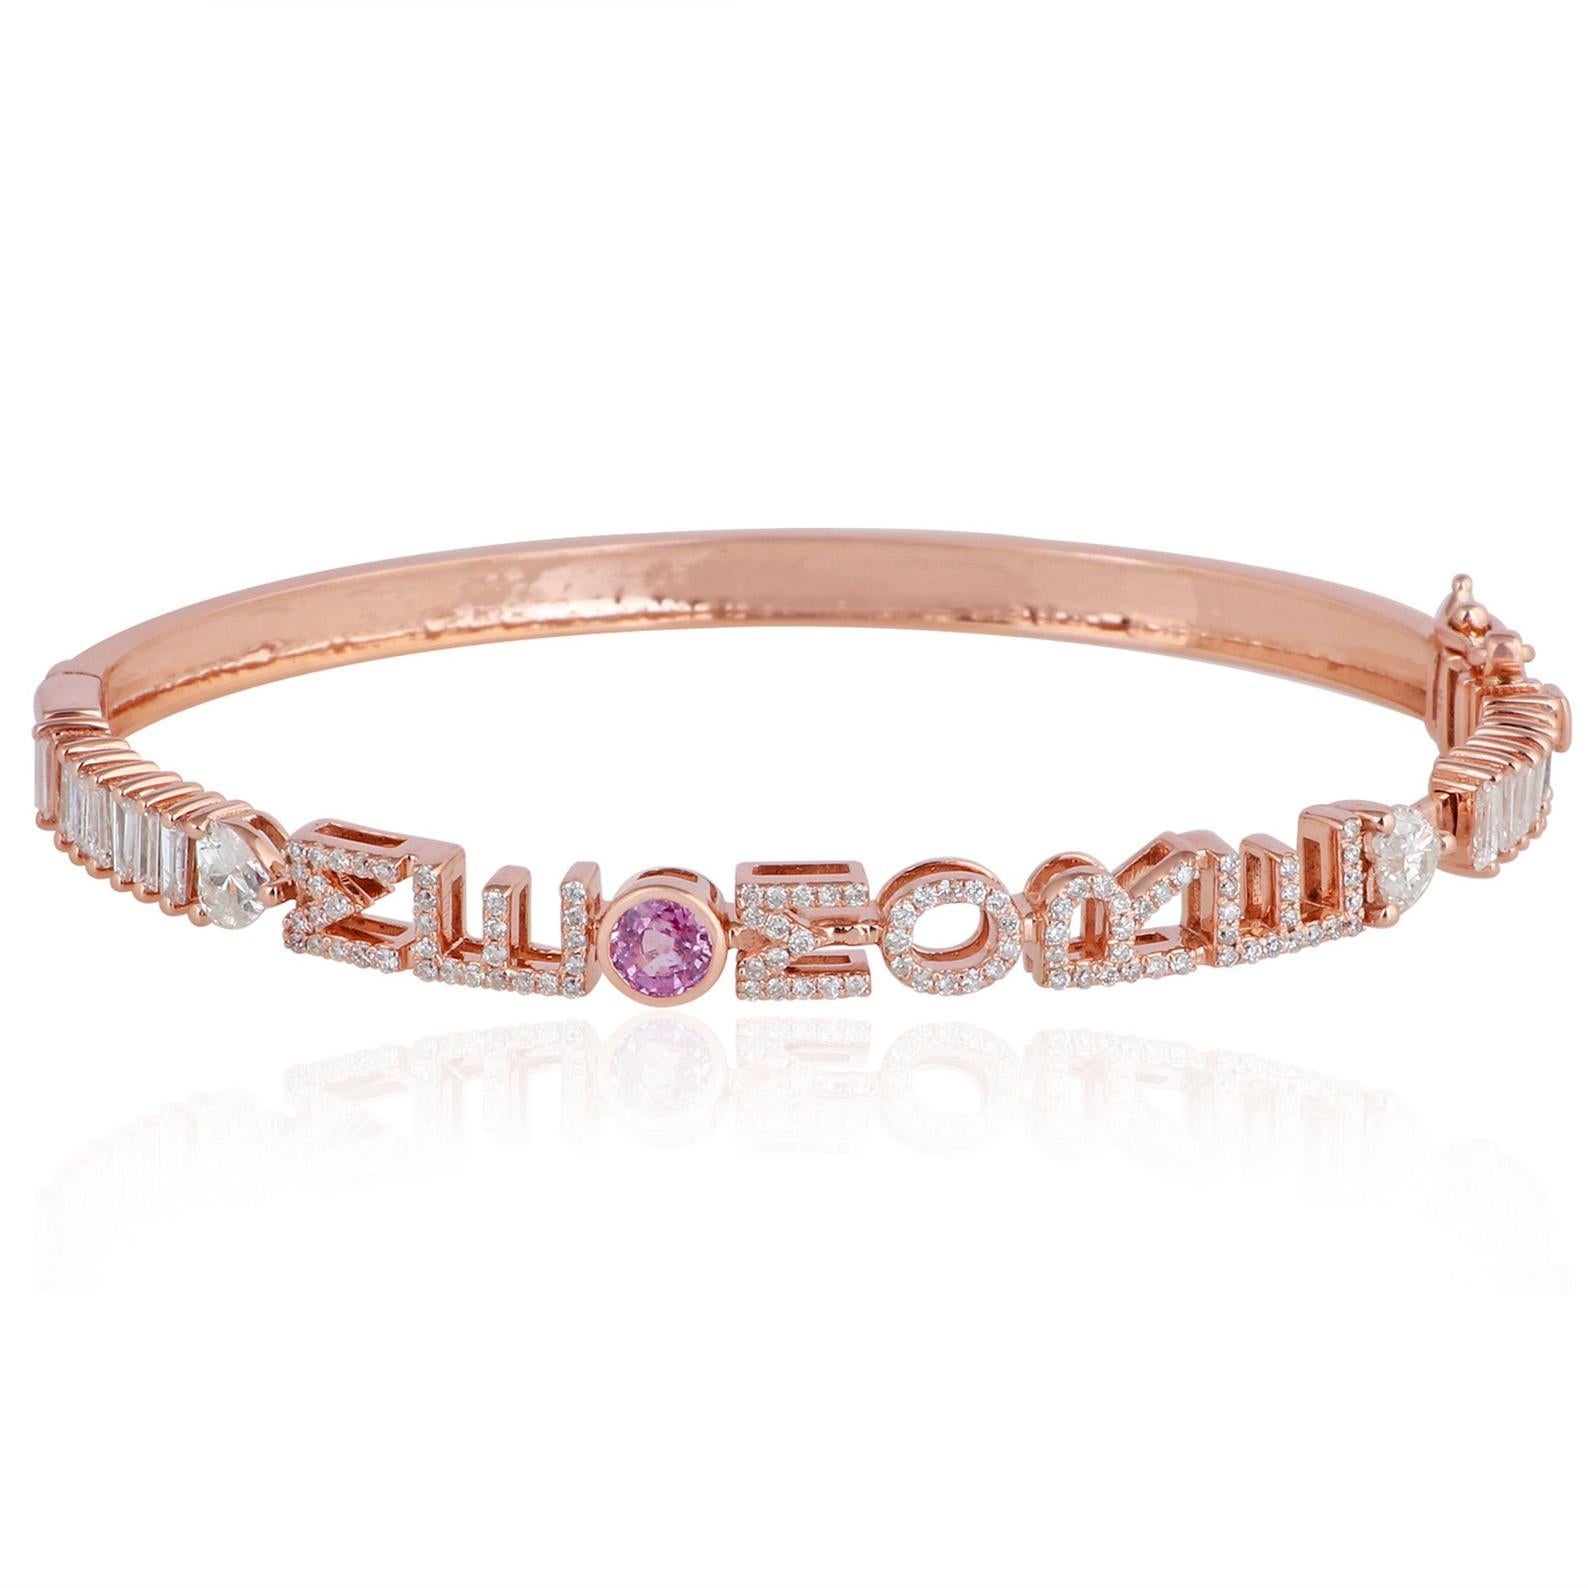 A stunning bangle bracelet handmade in 14K gold. It is hand set in .40 carats sapphire and 1.21 carats of sparkling diamonds. Wear it alone or stack it with your favorite pieces.  Please specify your custom name or initials at time of order.

FOLLOW